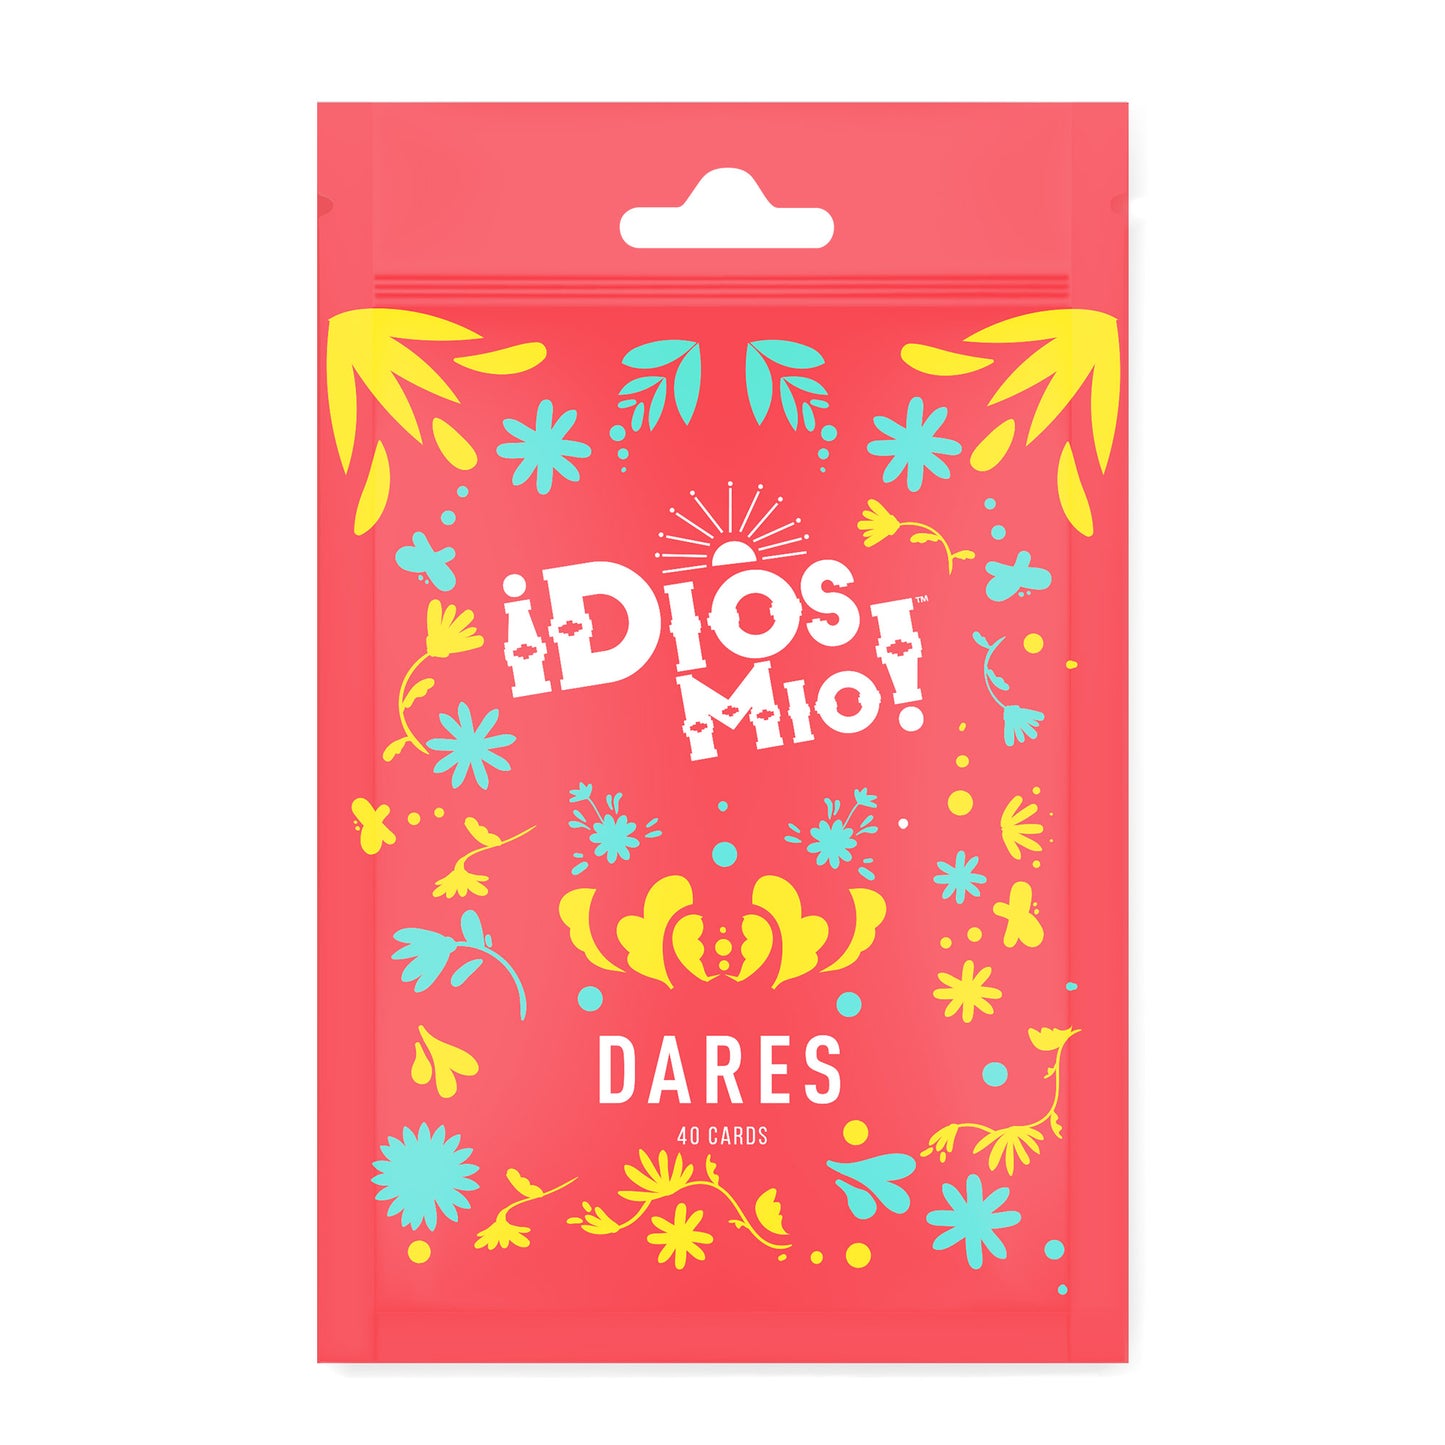 ¡Dios Mio!® - Dares Expansion Pack